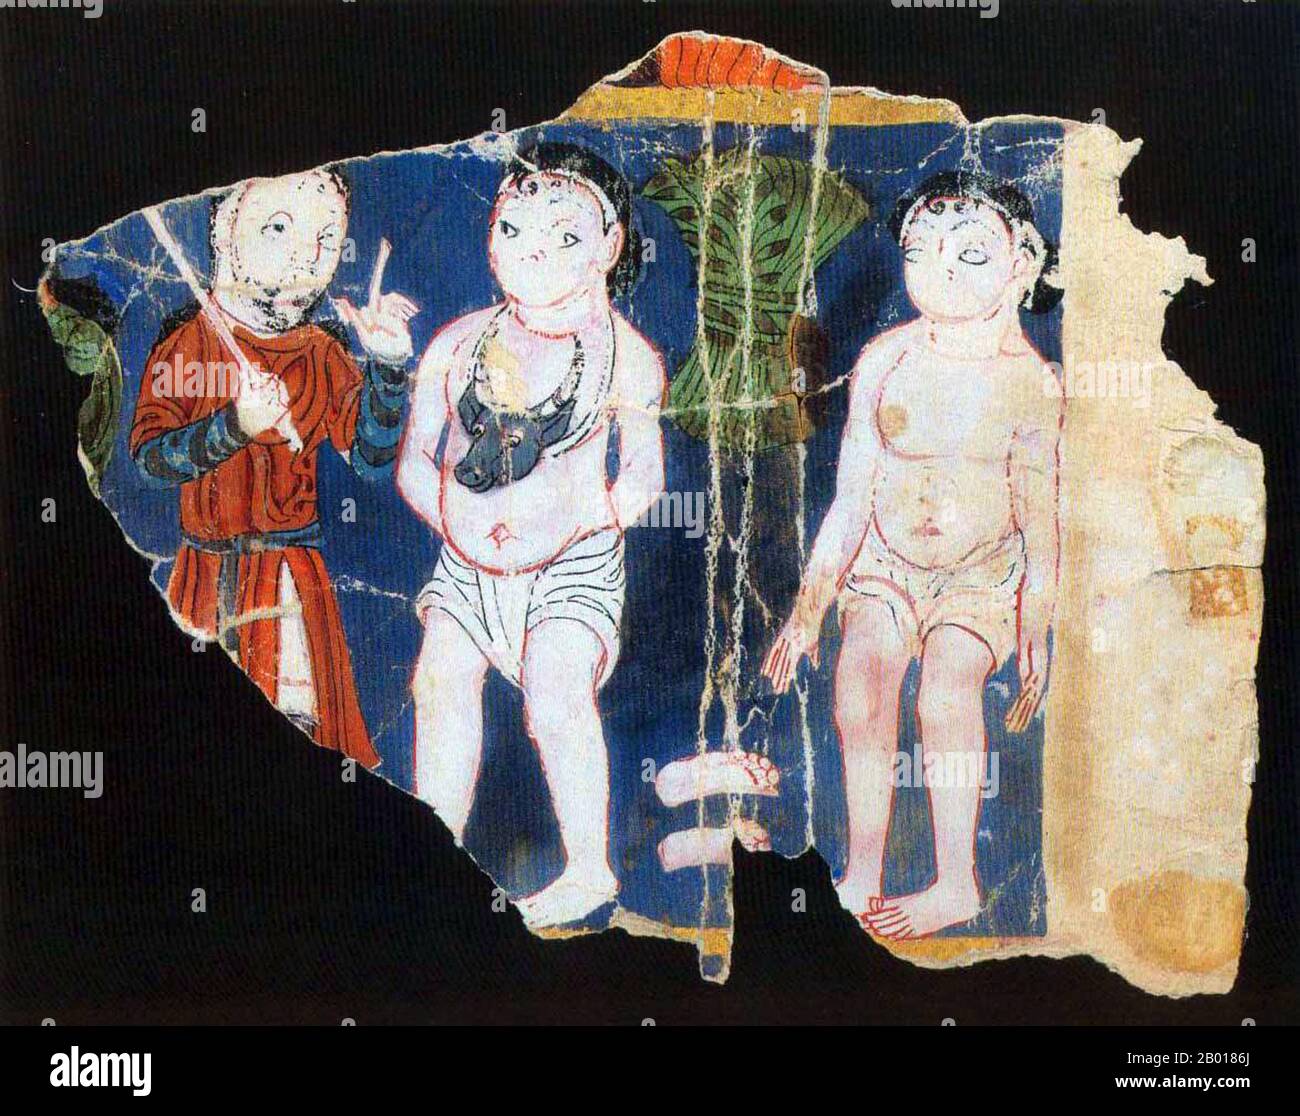 China: 'God admonishing Adam and Eve'. Fragment of an illustrated Manichaean text, Xinjiang, c. 8th-9th century.  Manichaeism was one of the major Iranian Gnostic religions, originating in Sassanid Persia. Although most of the original writings of the founding prophet Mani (c. 216–276 CE) have been lost, numerous translations and fragmentary texts have survived.  Manichaeism taught an elaborate cosmology describing the struggle between a good, spiritual world of light, and an evil, material world of darkness. Stock Photo